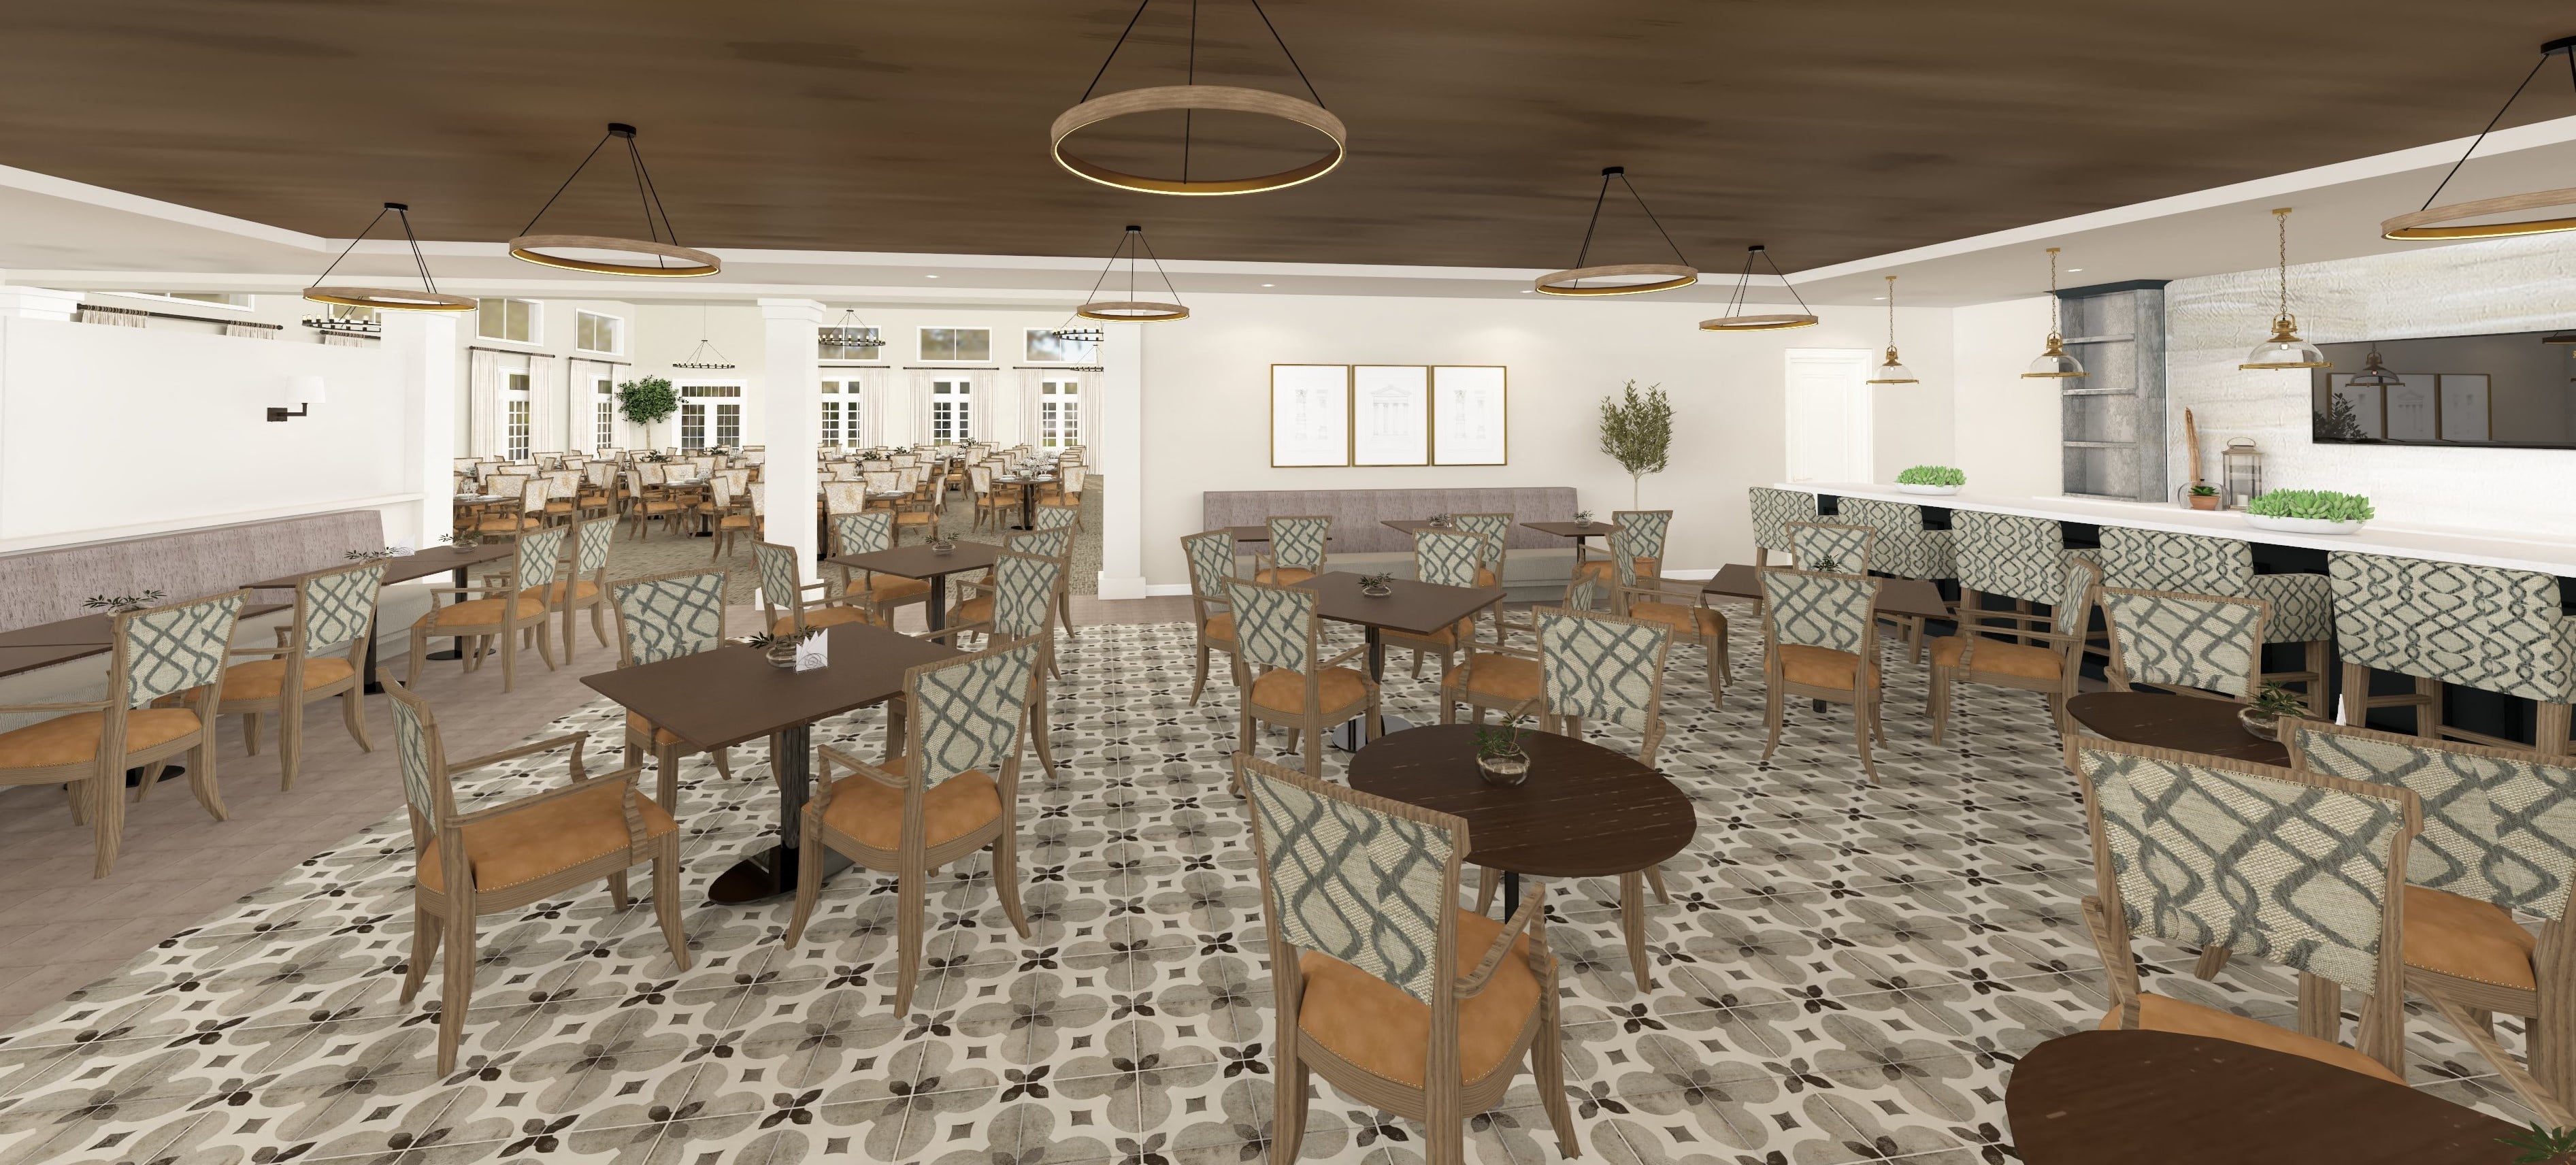 A rendering of the interior at the Avalon - a ball room